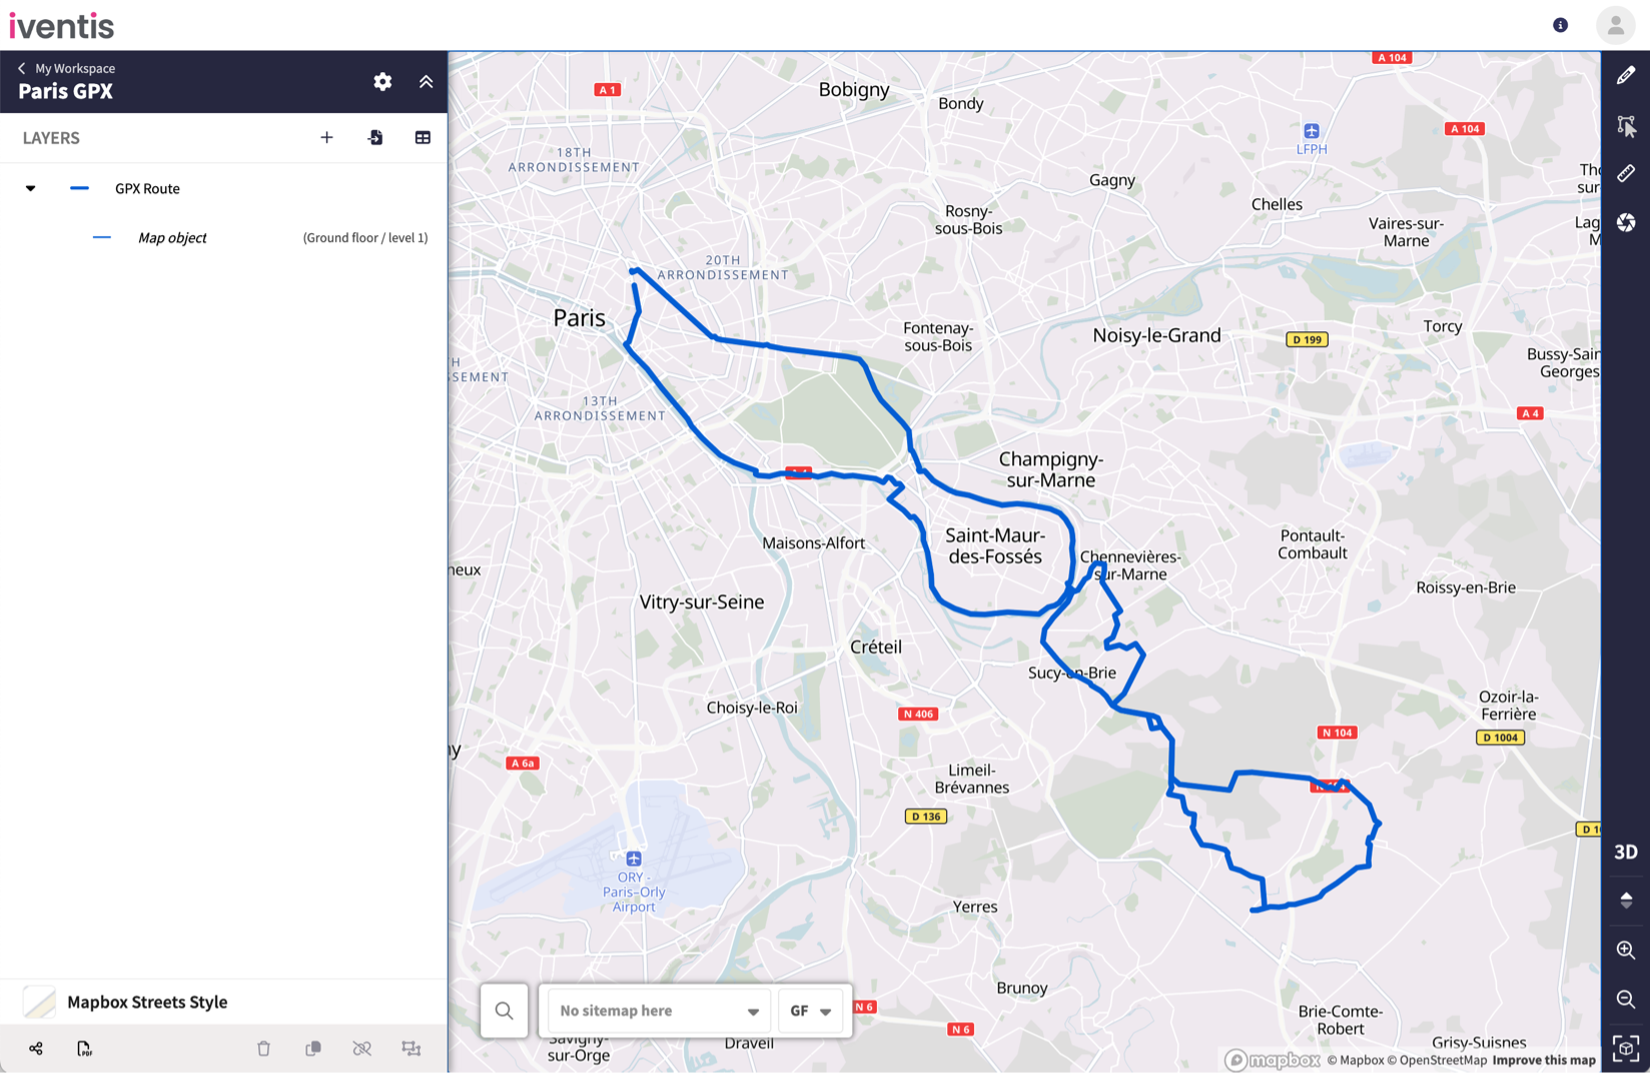 Screenshot from the Iventis Planner showing how routes can be traced using GPX file import.